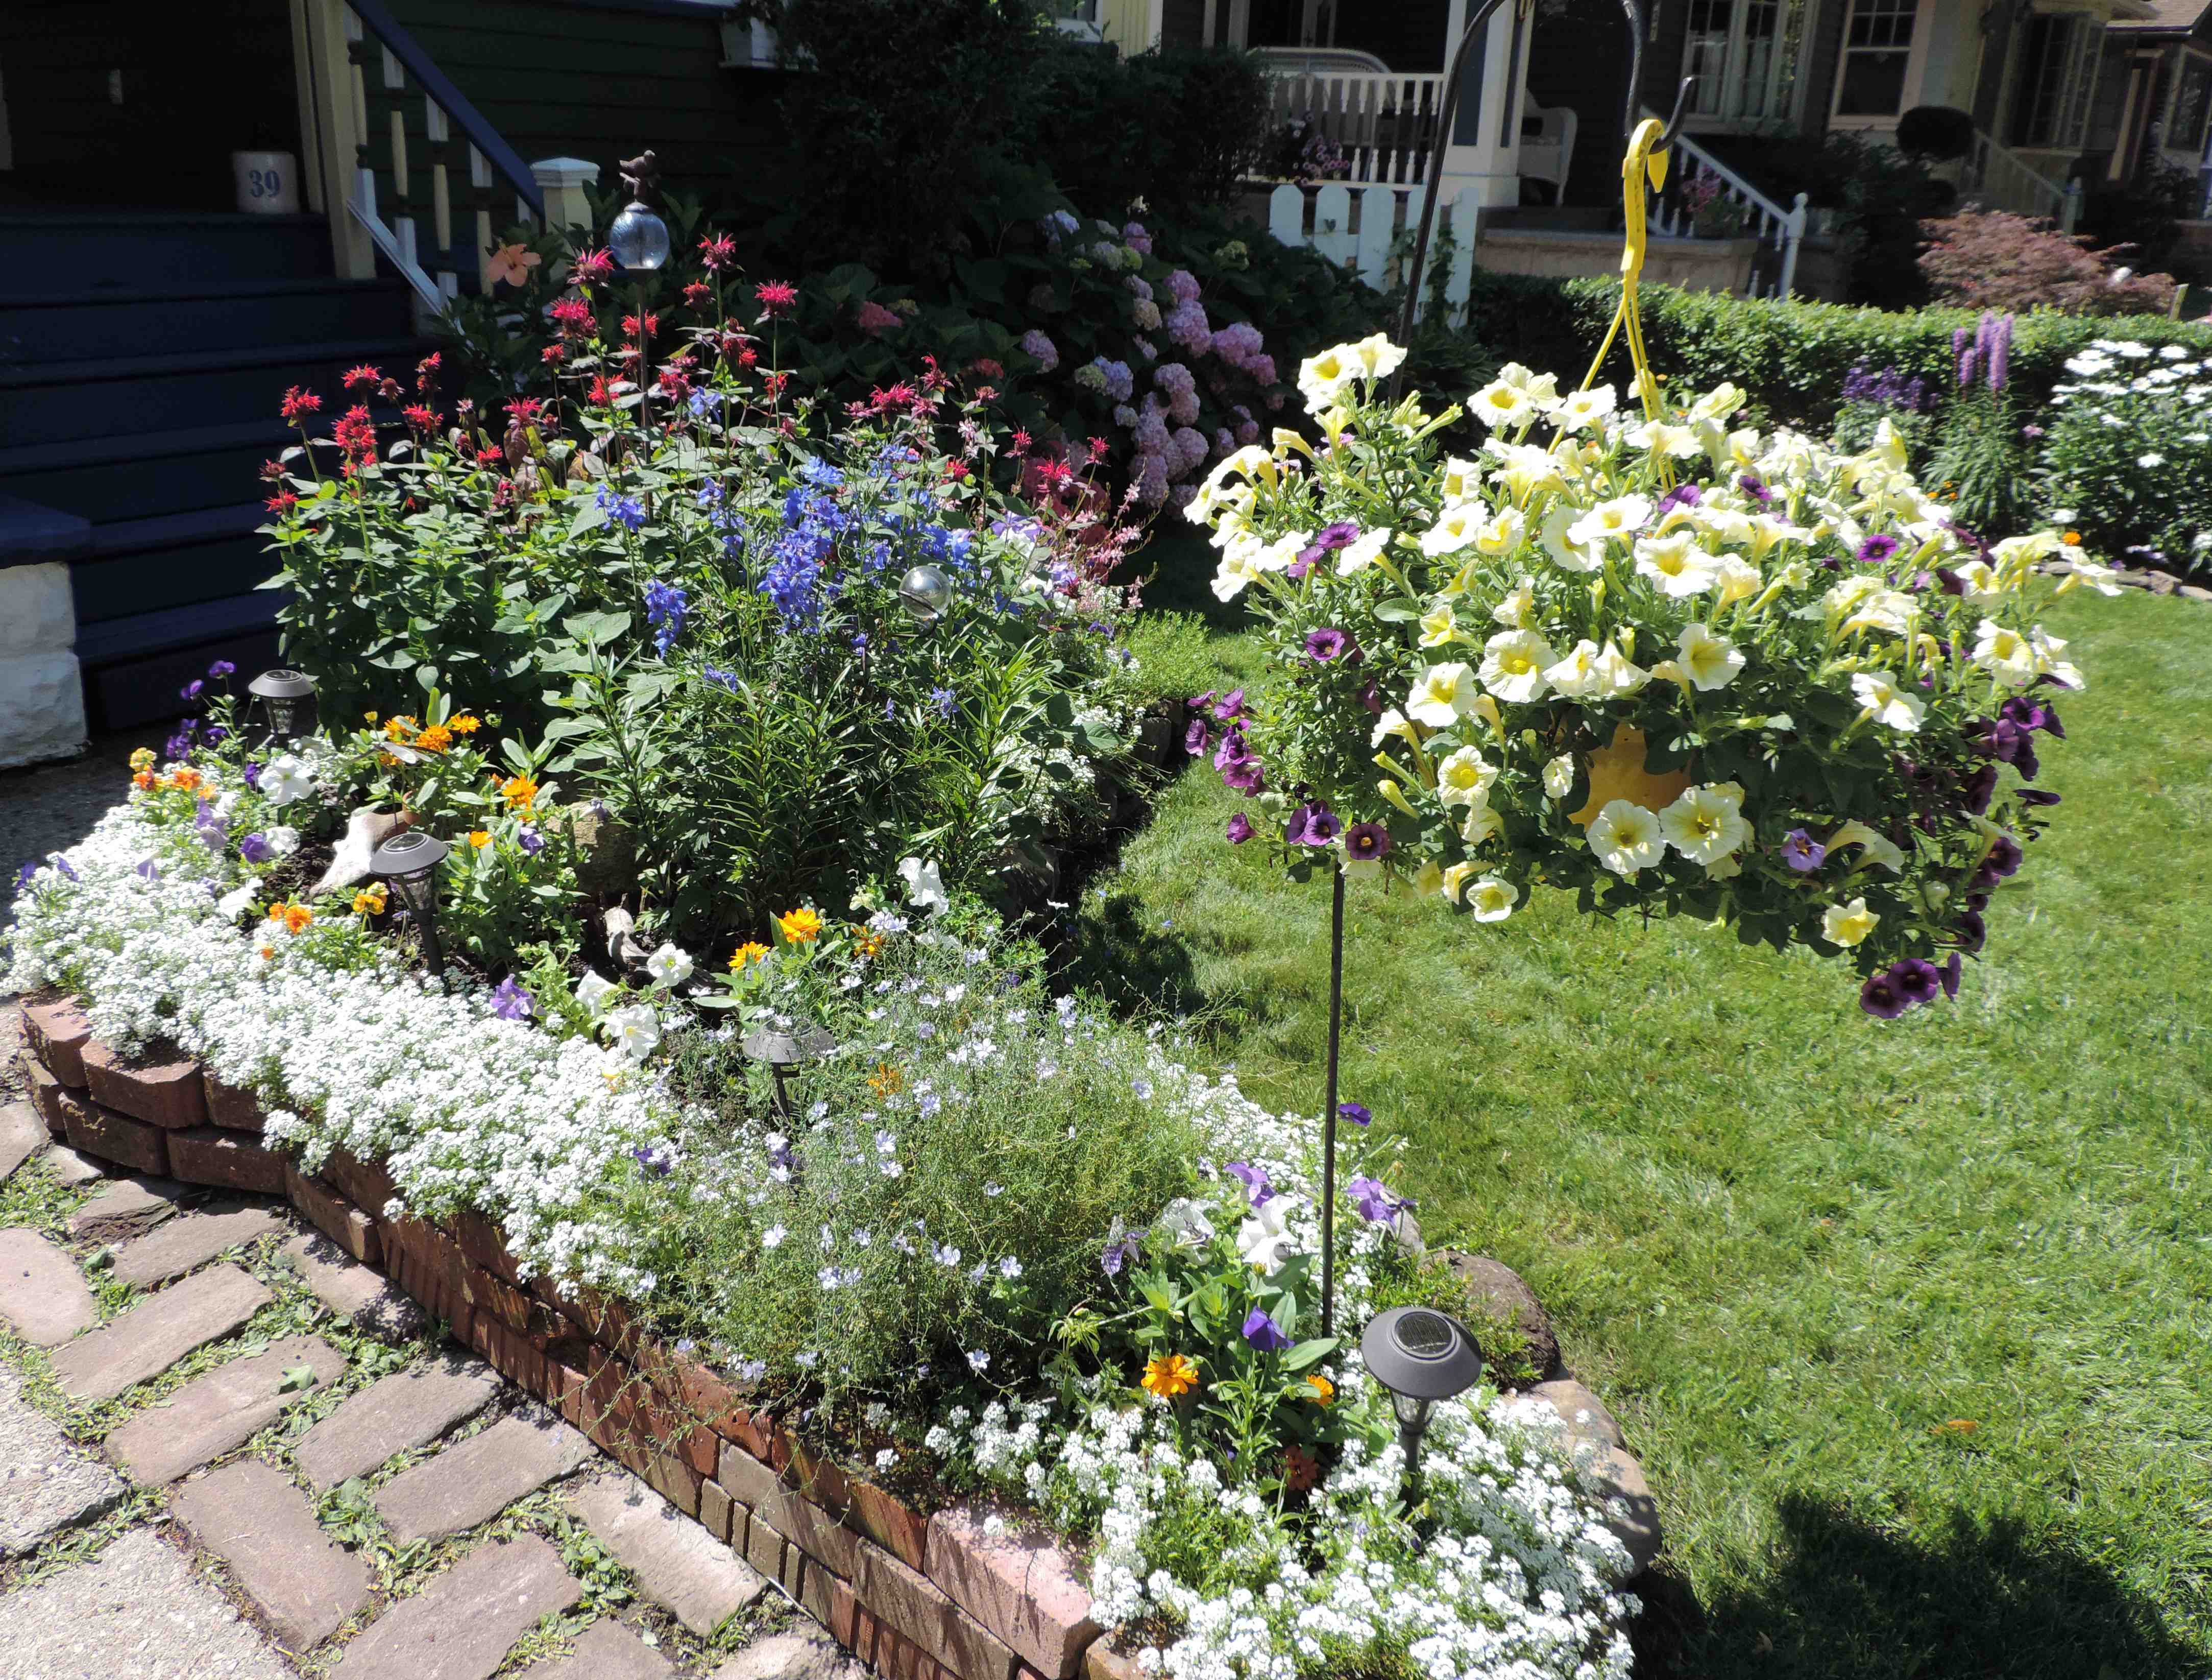 Annual South Buffalo Alive Garden Tour set for July 17